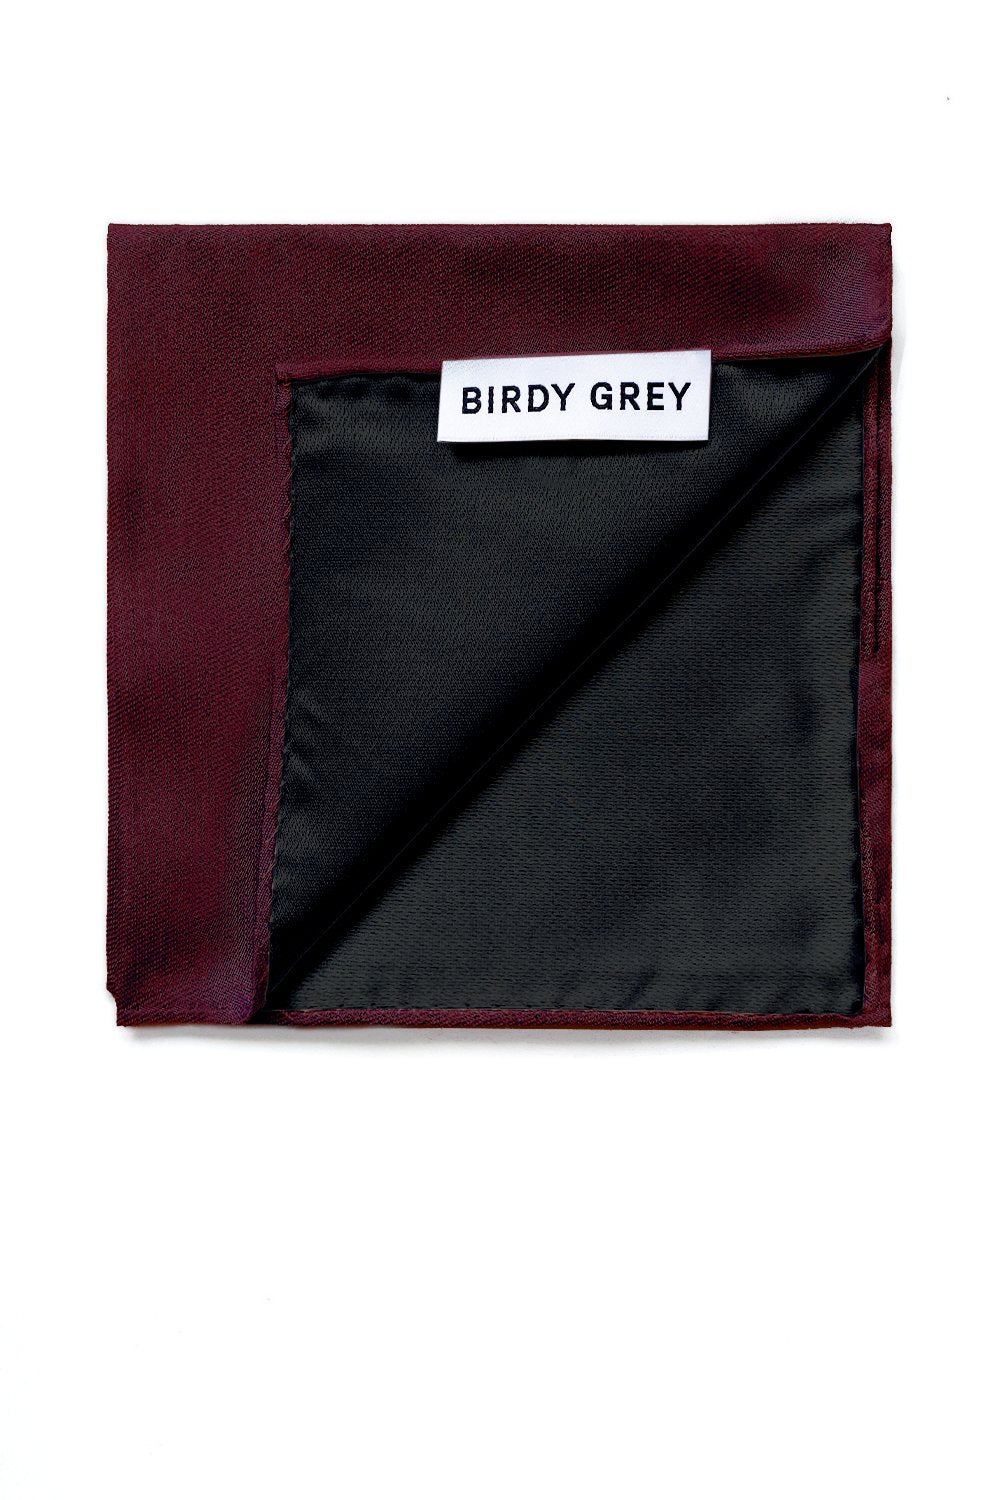 Didi Pocket Square in cabernet burgundy by Birdy Grey, interior view